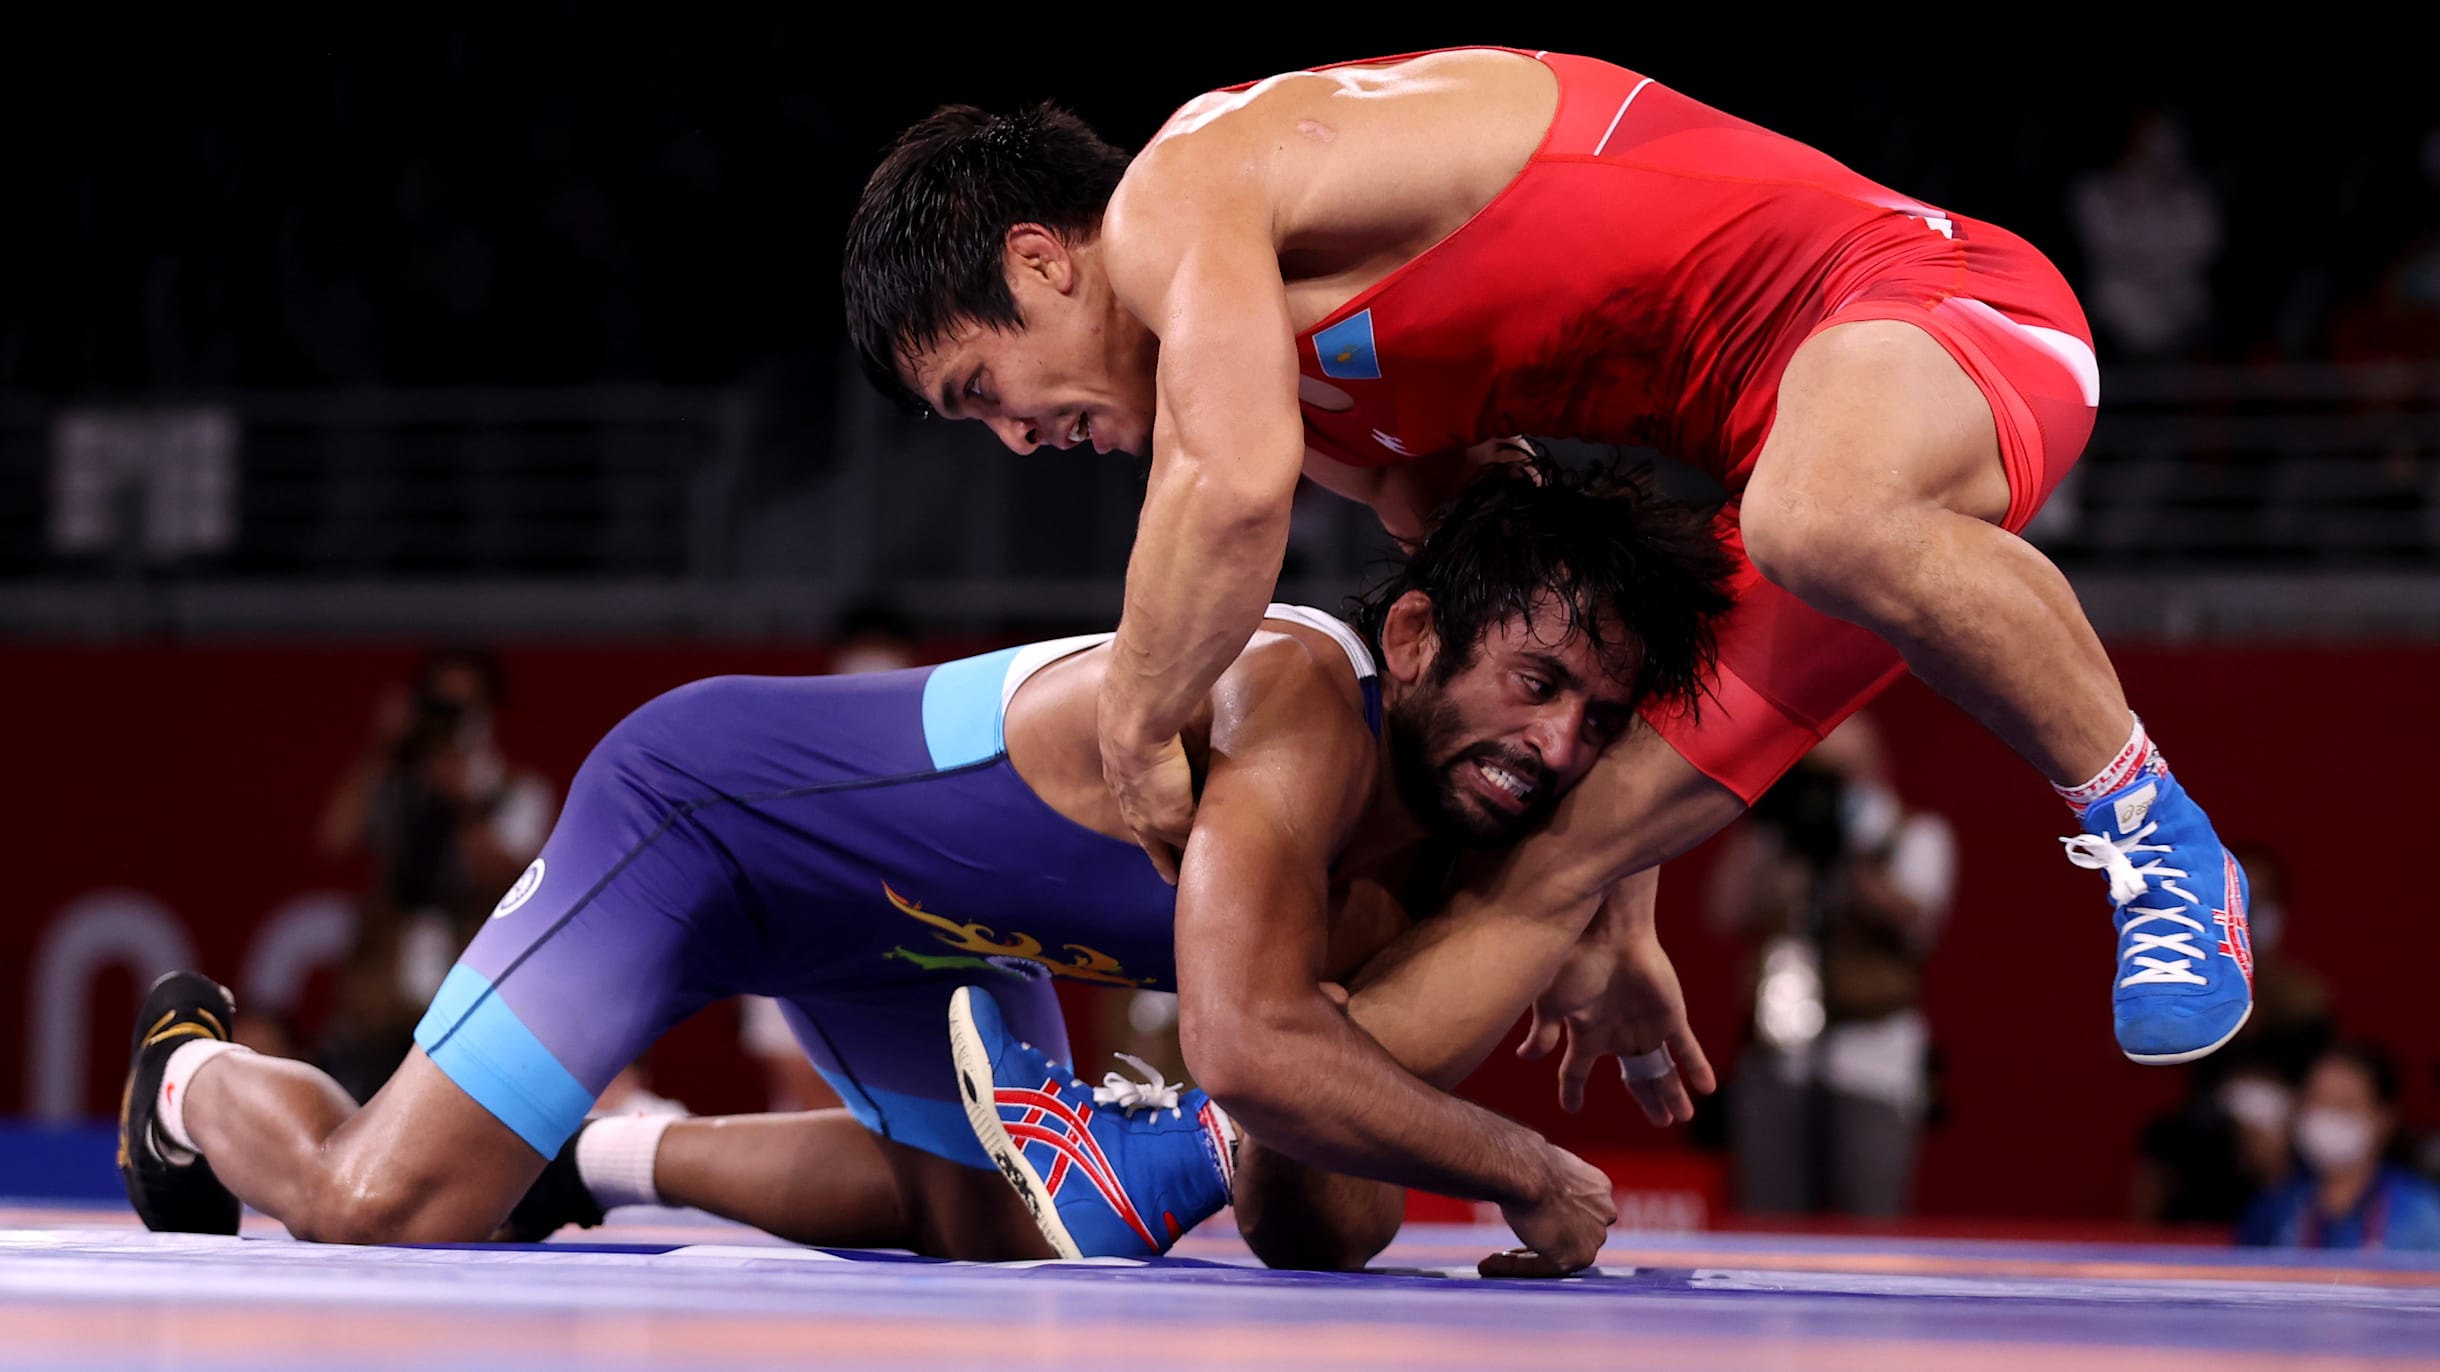 Freestyle wrestling Rules, scoring, and all you need to know